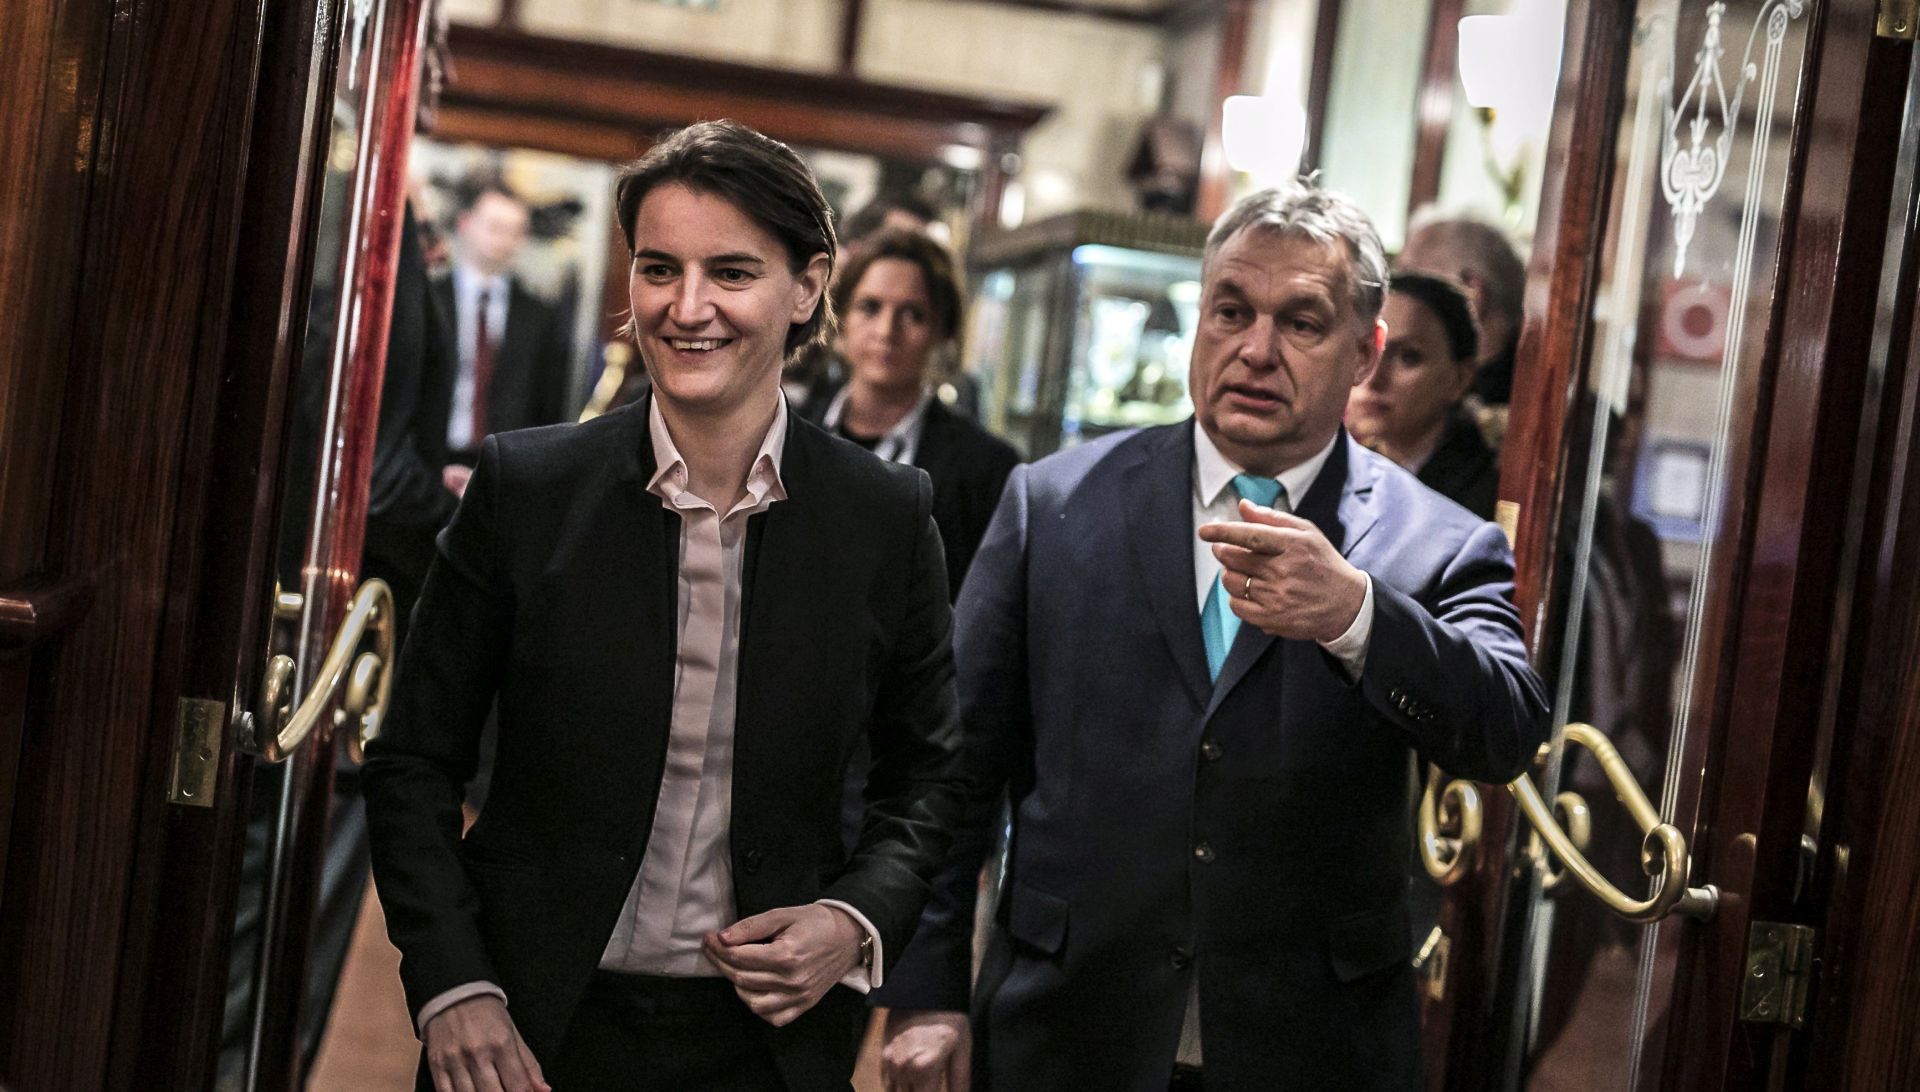 epa06506260 A handout photo made available by the Hungarian Prime Minister's Office shows Serbian Prime Minister Ana Brnabic (l) and her Hungarian counterpart Viktor Orban (R) as they arrive for a dinner at Restaurant Gundel in Budapest, Hungary, 08 February 2018. Brnabic and Orban will hold official talks on 09 February.  EPA/BALAZS SZECSODI / PRIME MINISTER'S OFFICE / HANDOUT HUNGARY OUT HANDOUT EDITORIAL USE ONLY/NO SALES